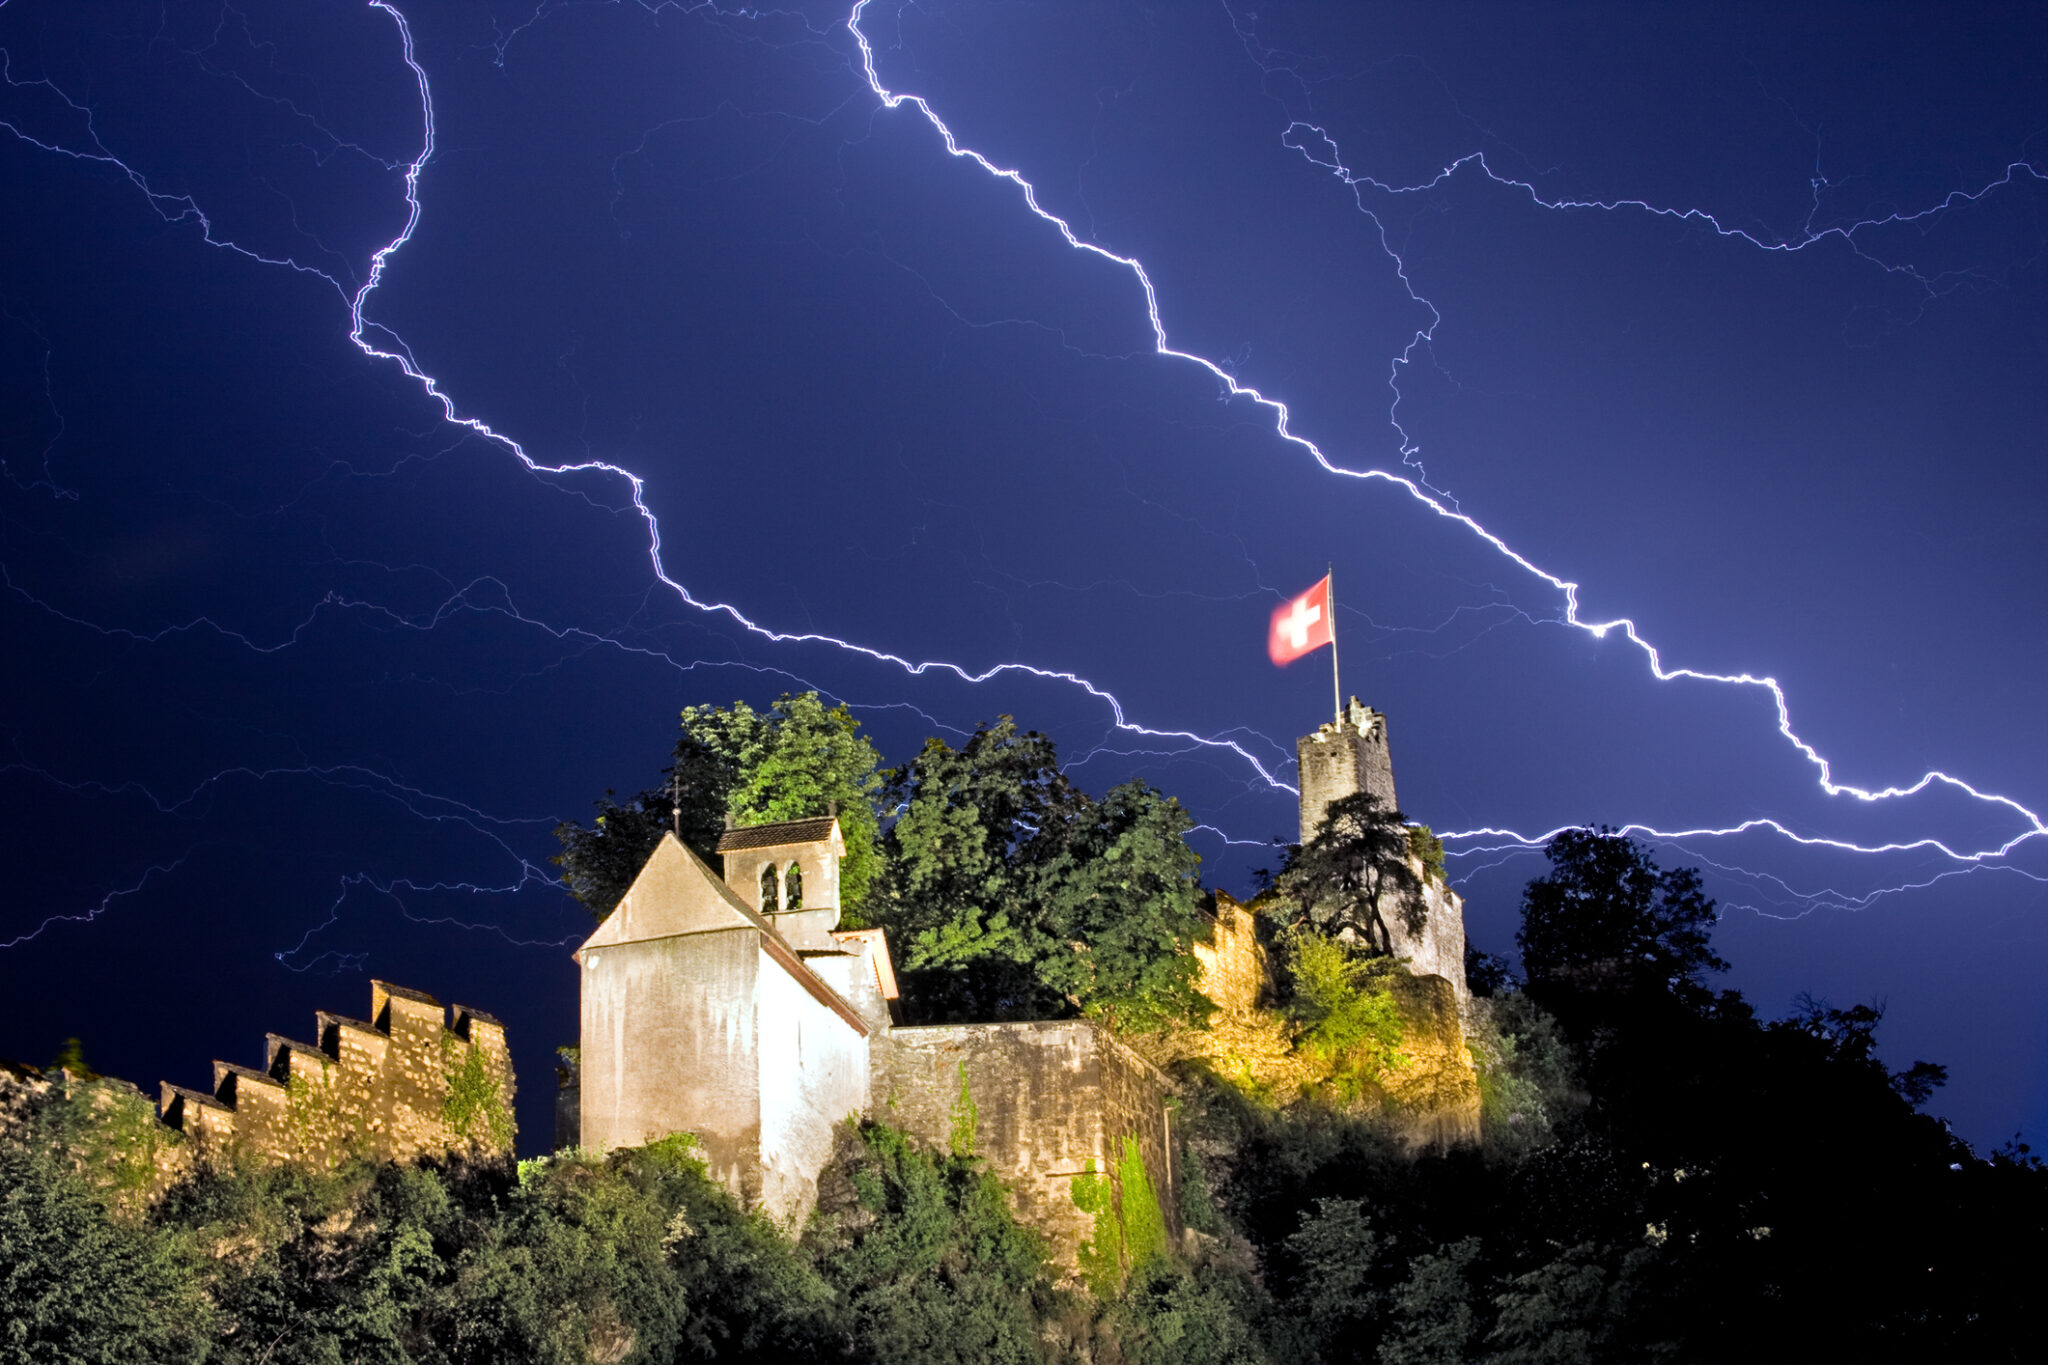 A bolt of lightning crosses the sky over the Stein castle in Baden Switzerland. A Swiss flag is shown waving in the forceful wind over the castle.